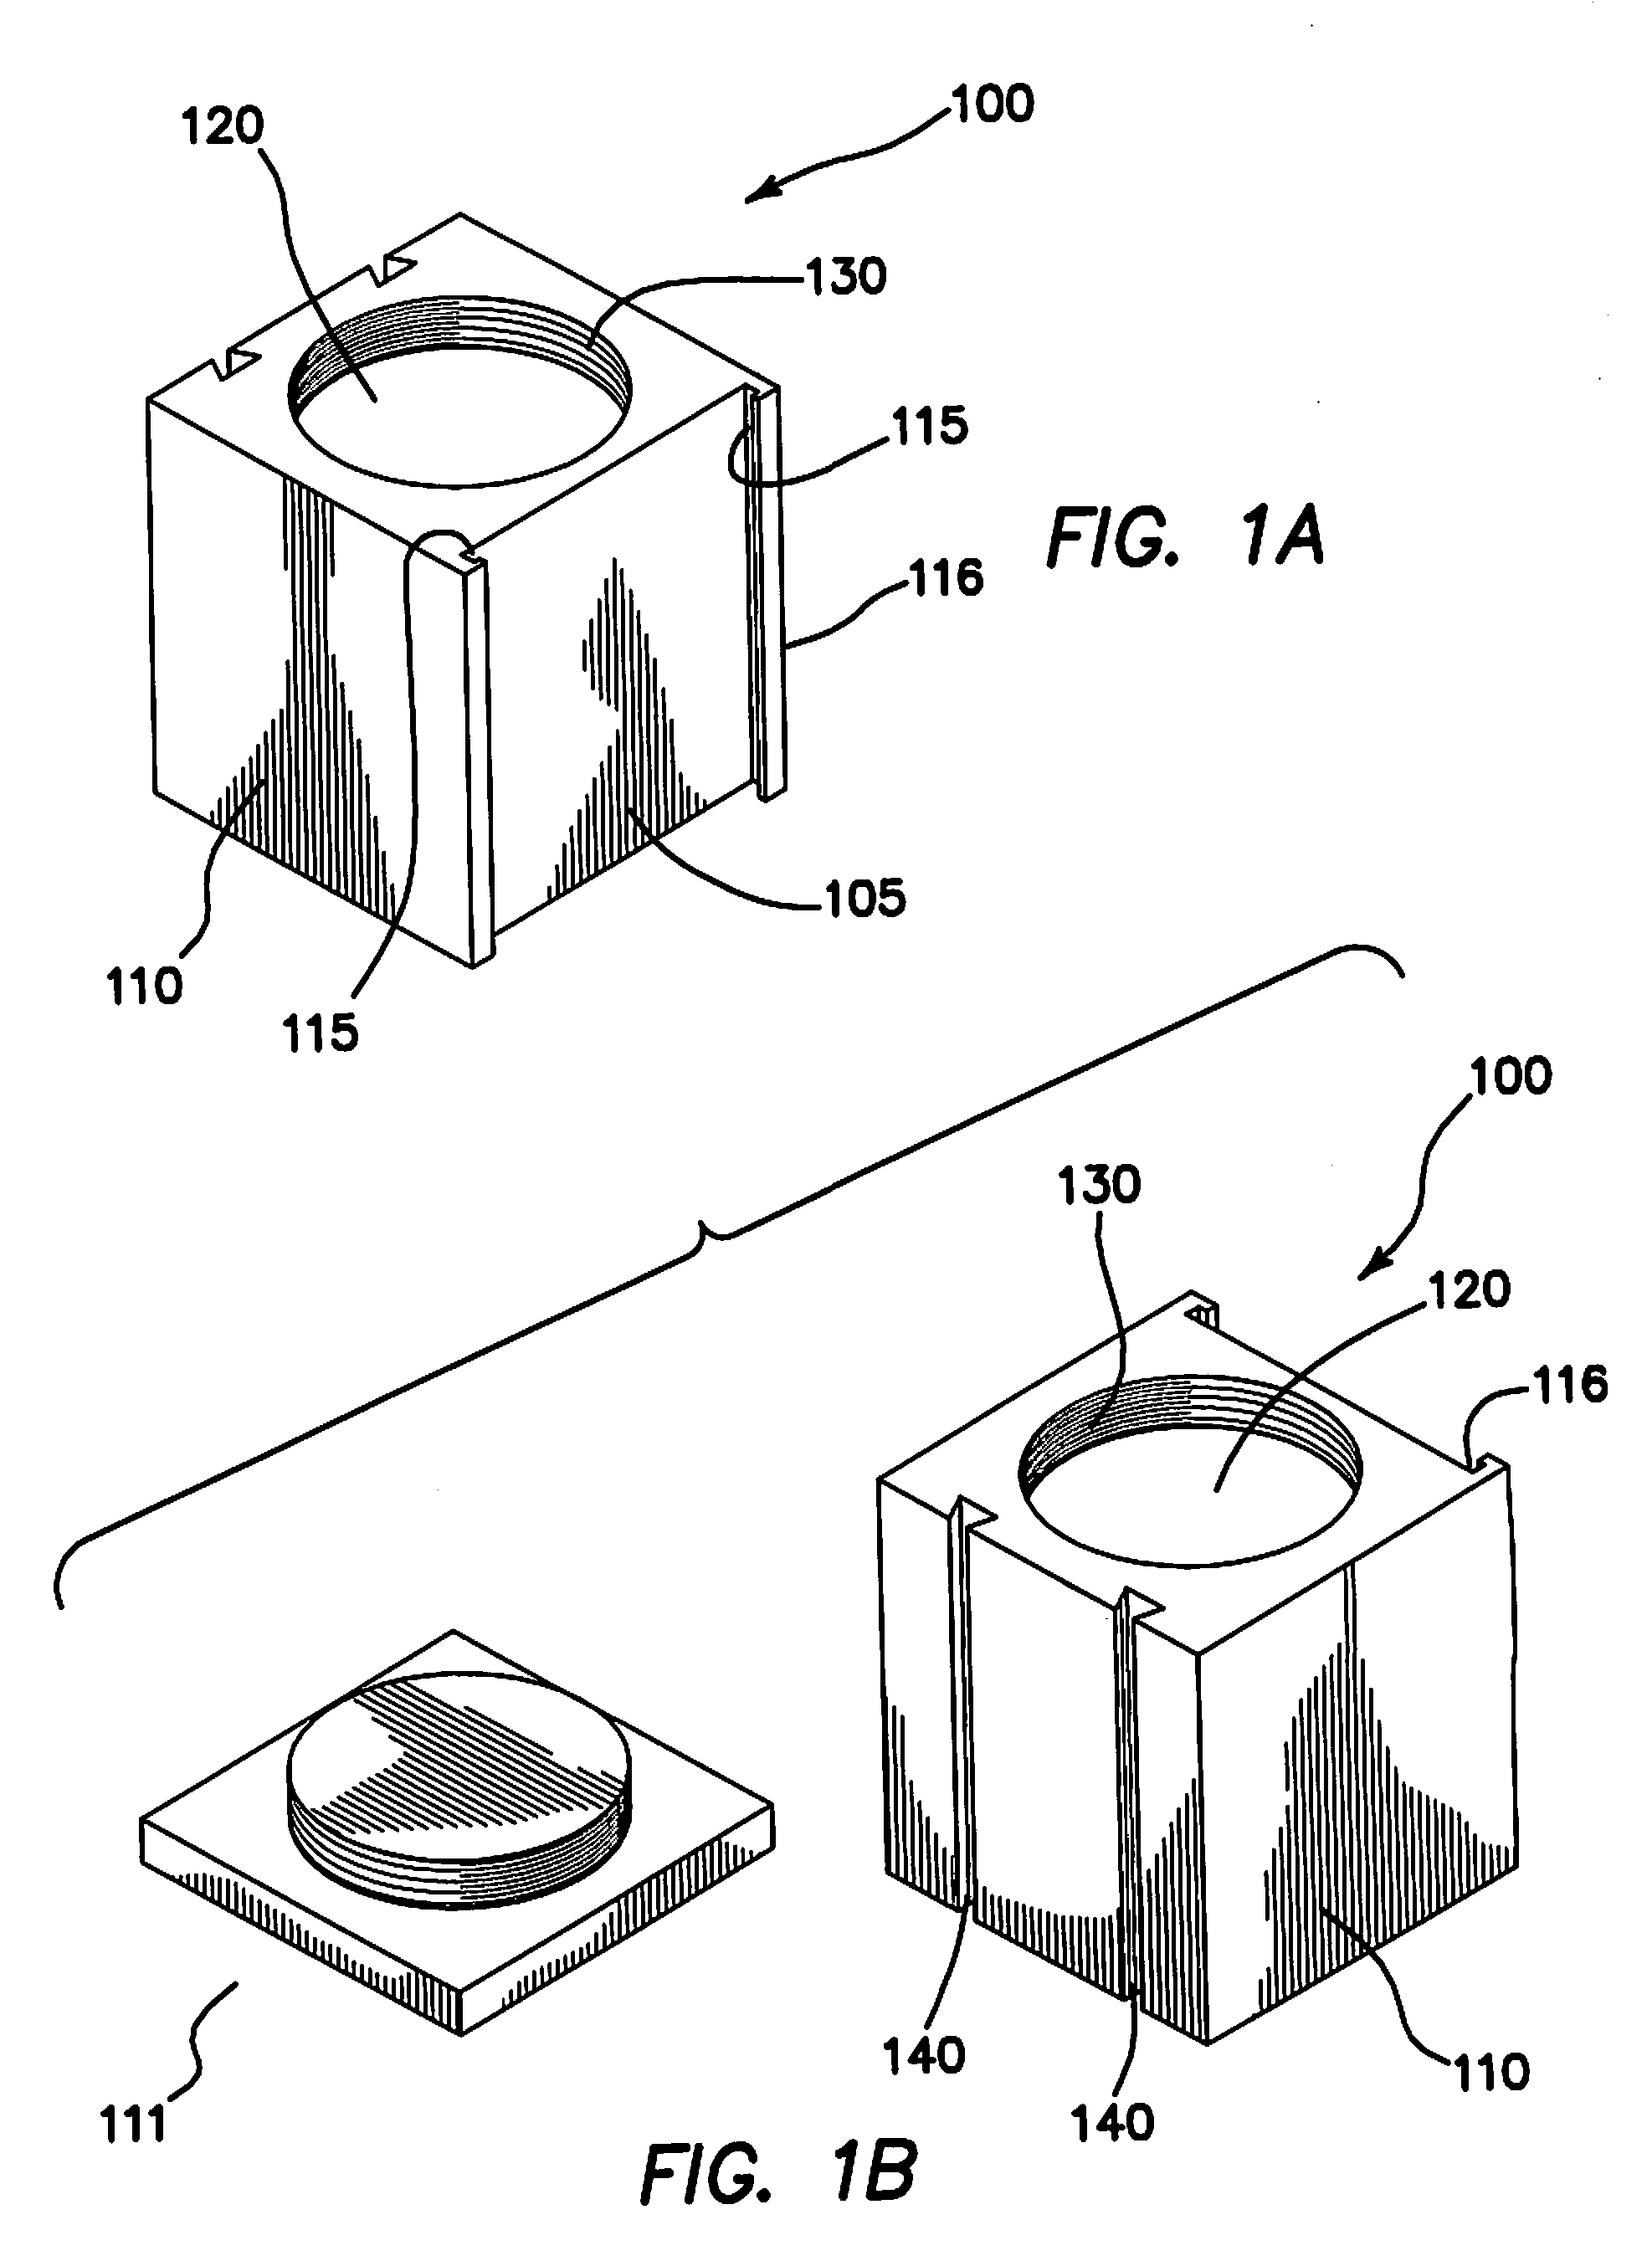 Urn and urn system